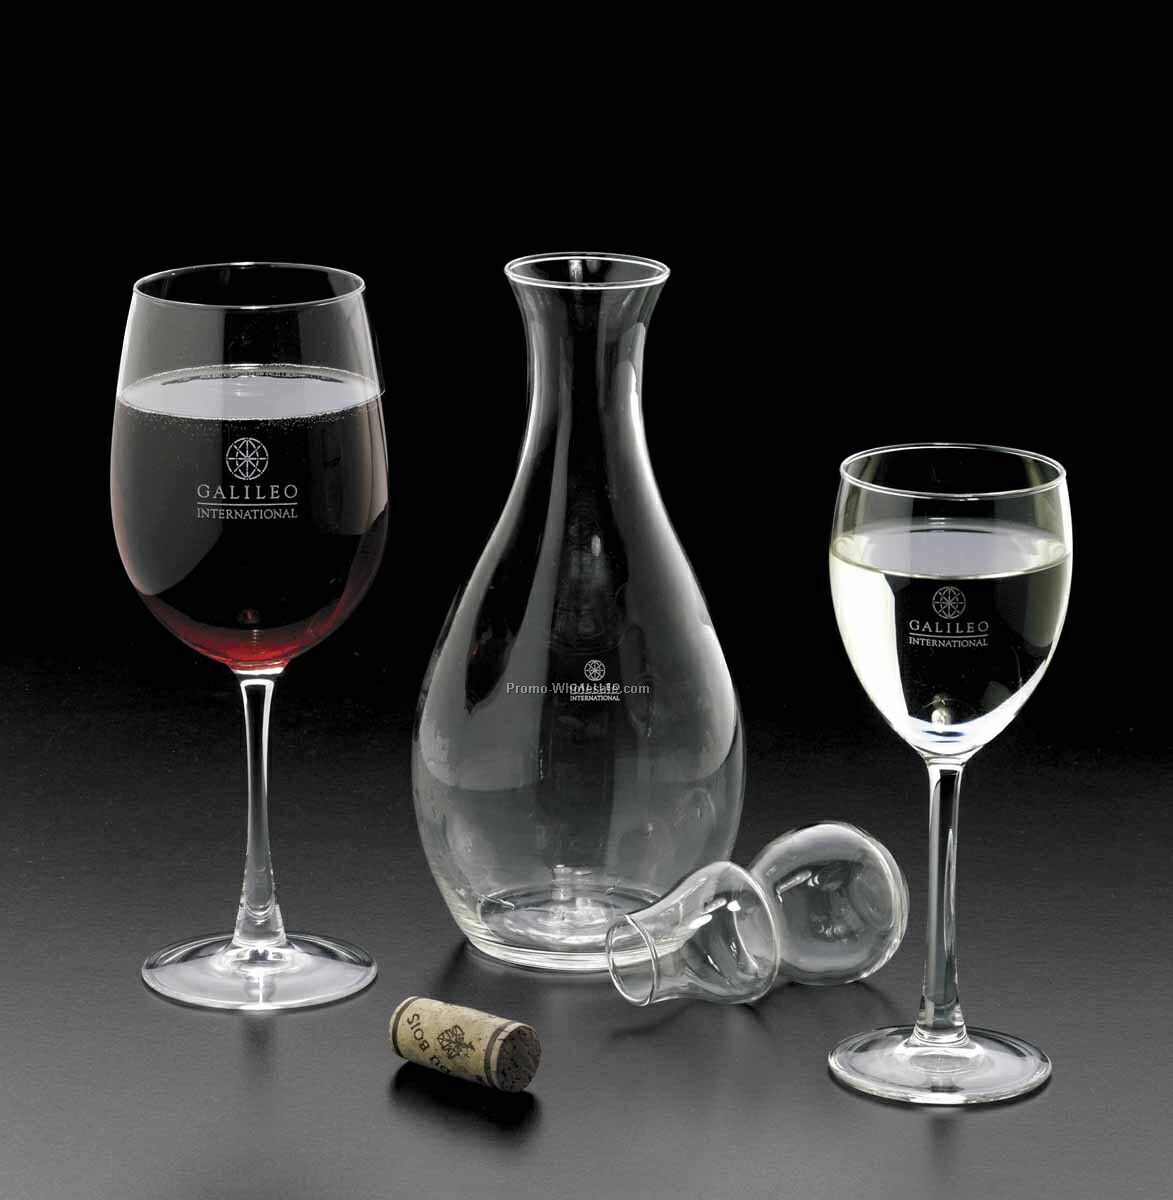 The Curvature Decanter